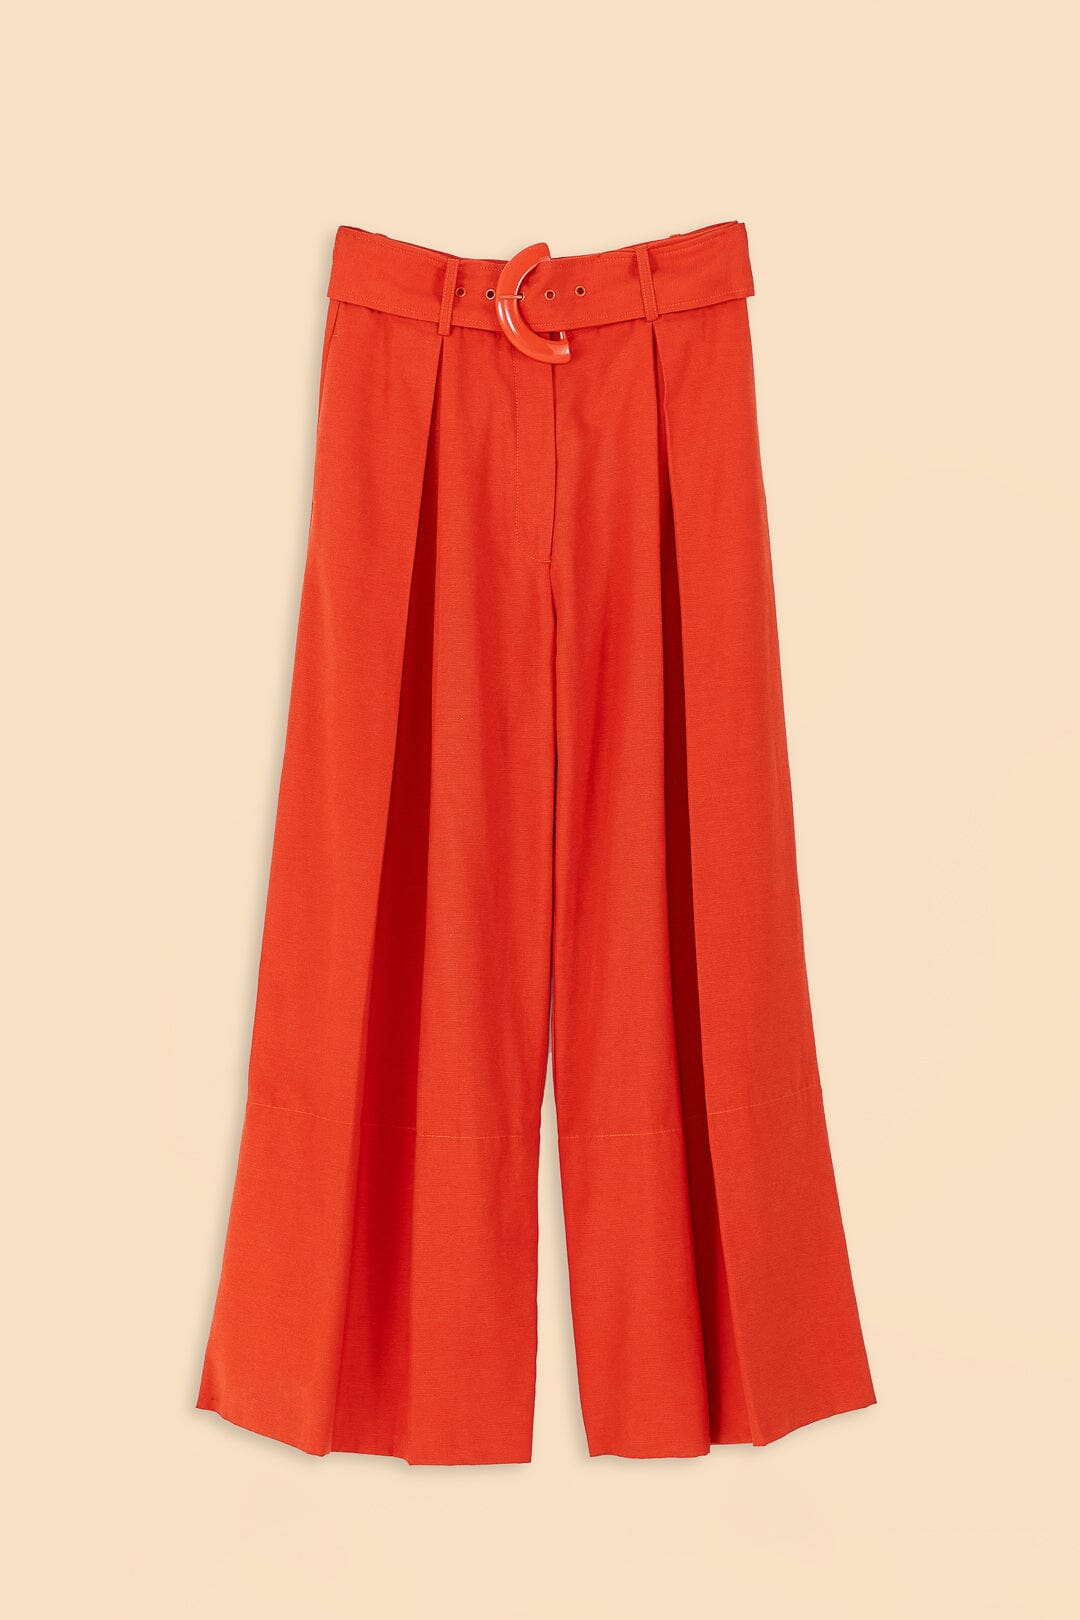 adidas Originals resort wide leg pants in off white with red